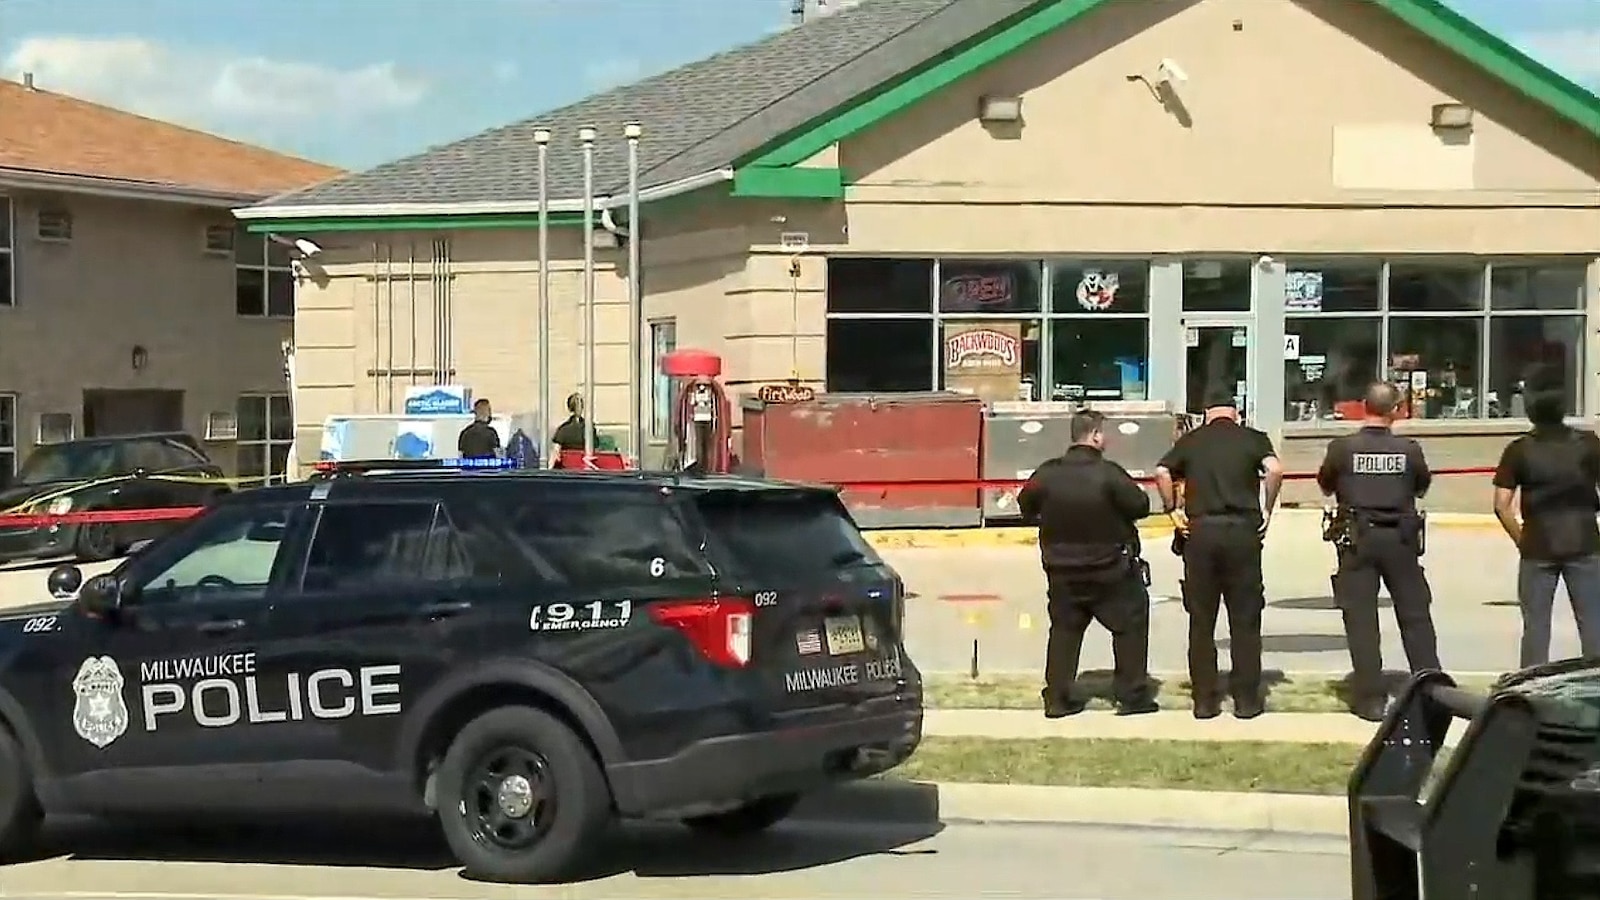 4 injured, including 2 children, in shooting at Milwaukee gas station